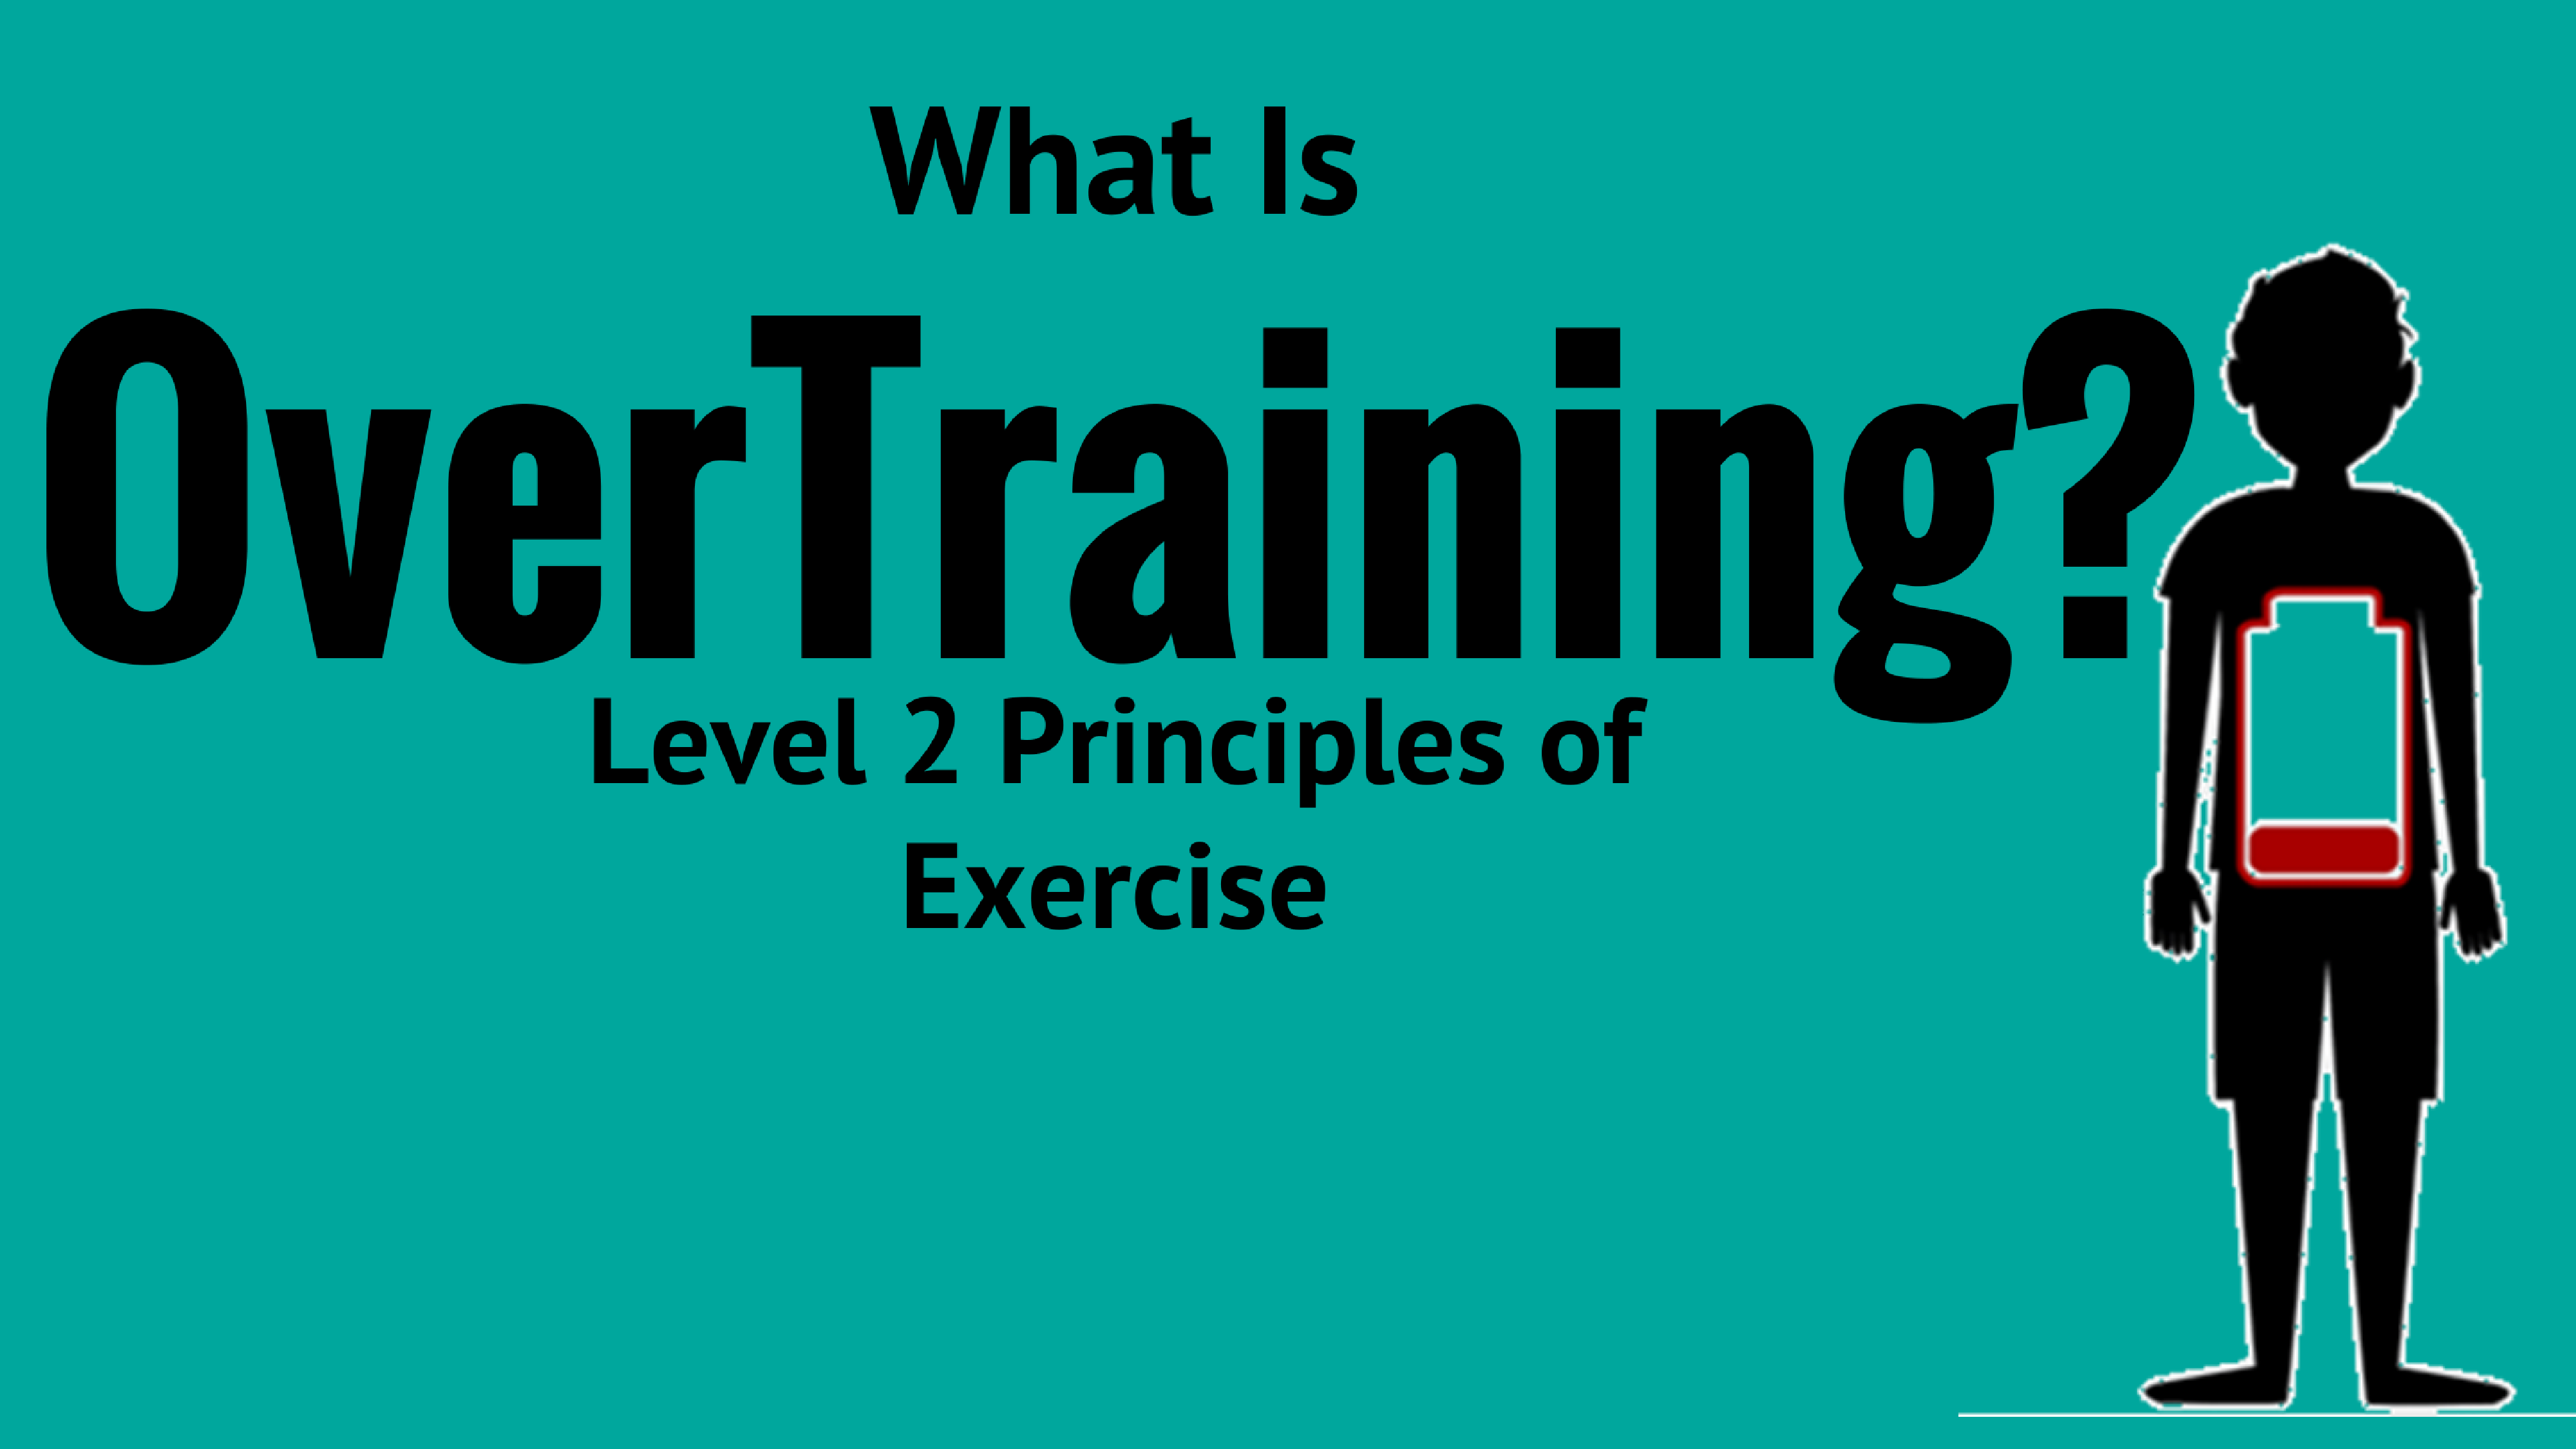 [L2 Principles of Exercise] What is Overtraining?